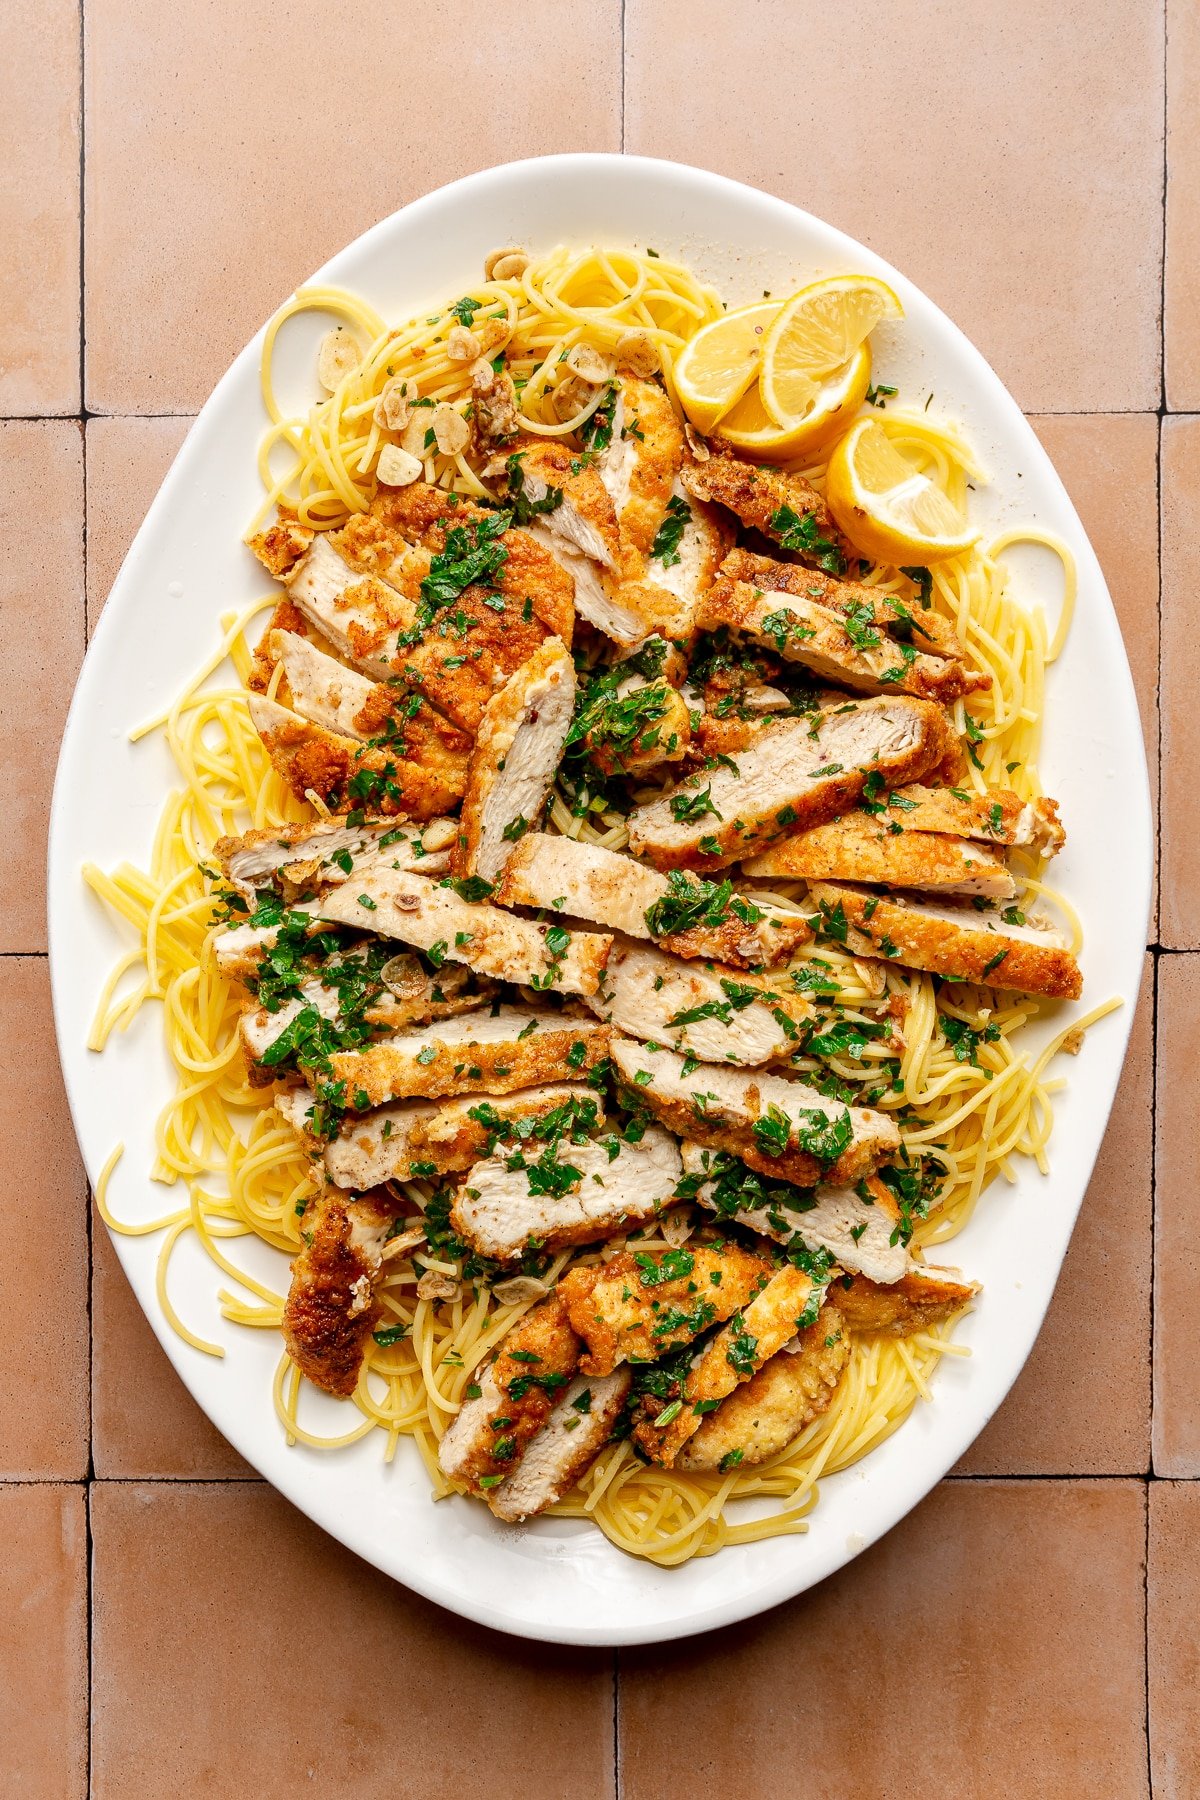 Chicken scampi sits on a bed of spaghetti on a white serving plate. Slices of lemon sit to the side.